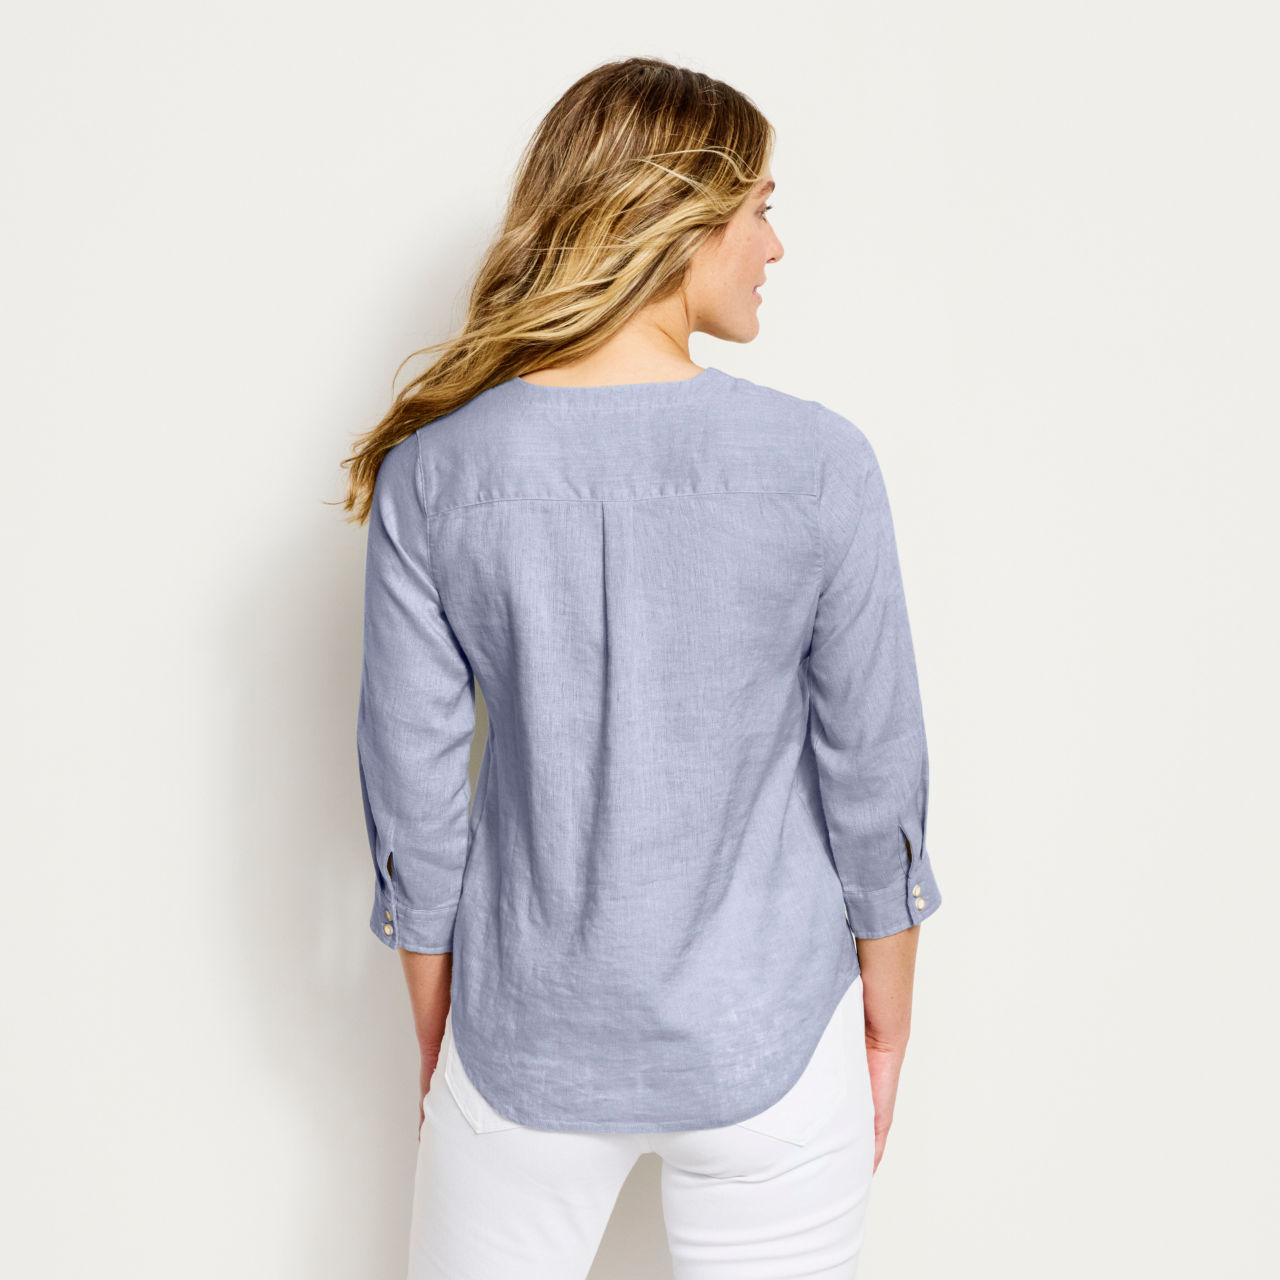 Women’s Performance Linen Three-Quarter-Sleeved Shirt - DUSTY BLUE CHAMBRAY image number 3